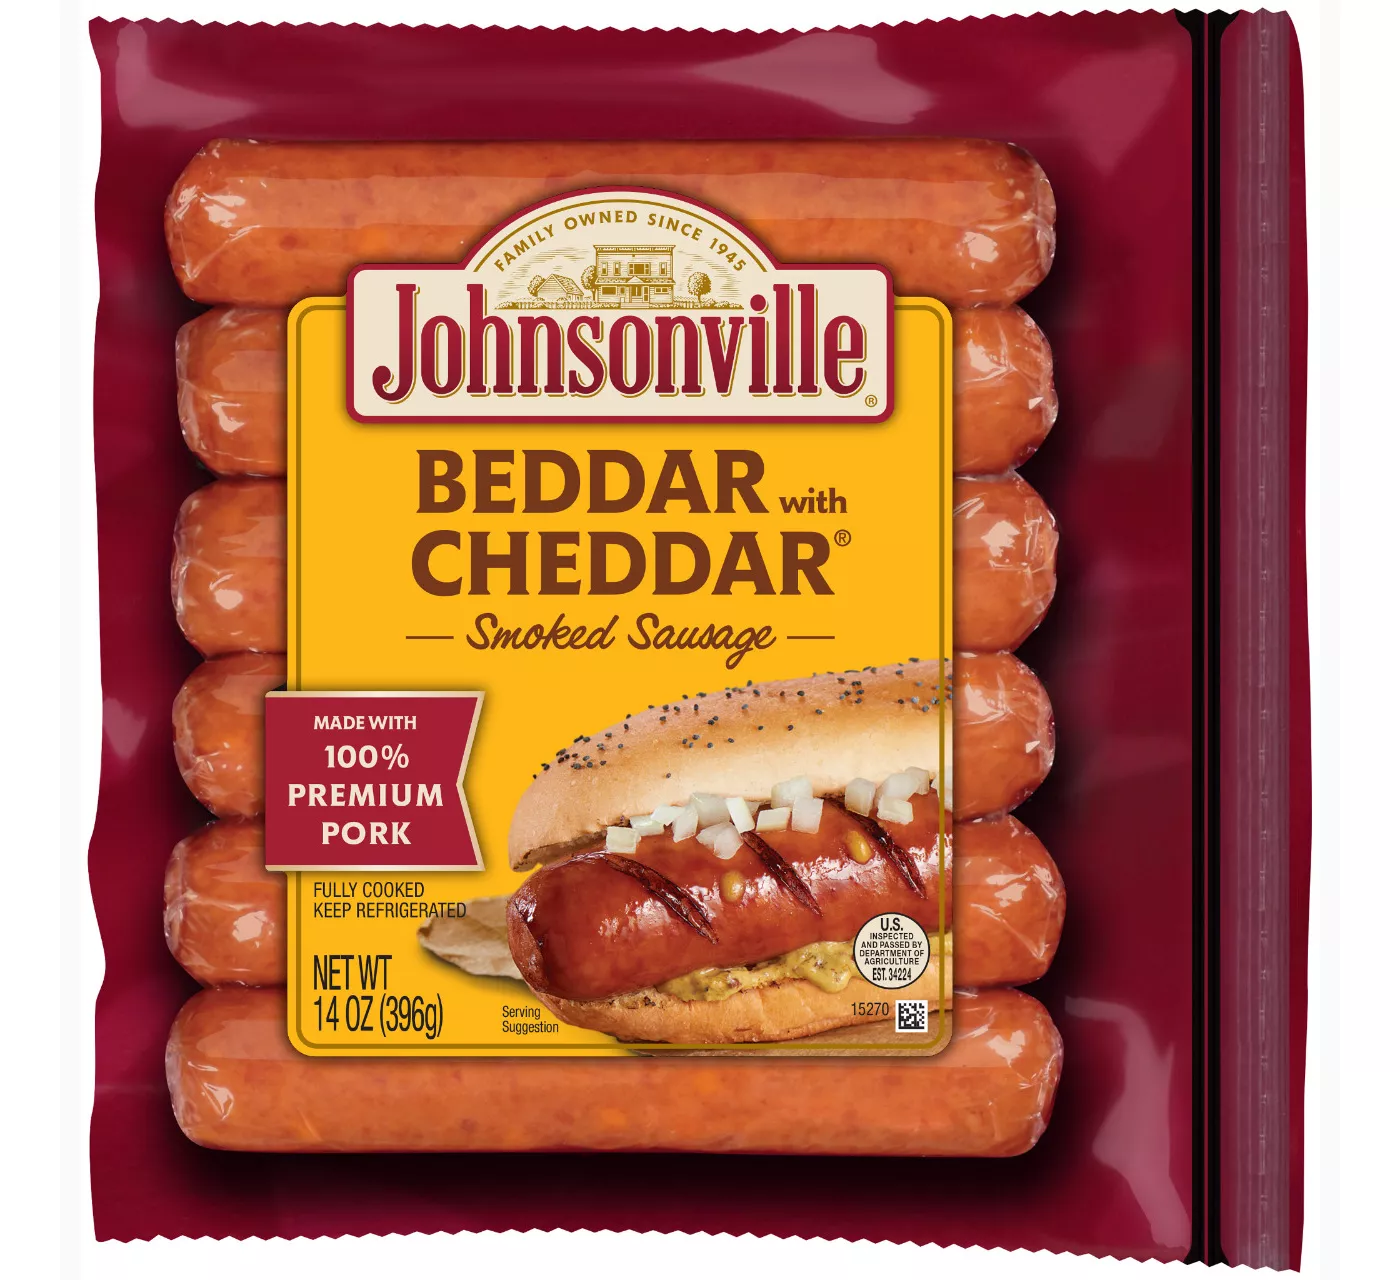 Johnsonville Beddar with Cheddar Smoked Sausage - 6ct/14oz - image 1 of 5